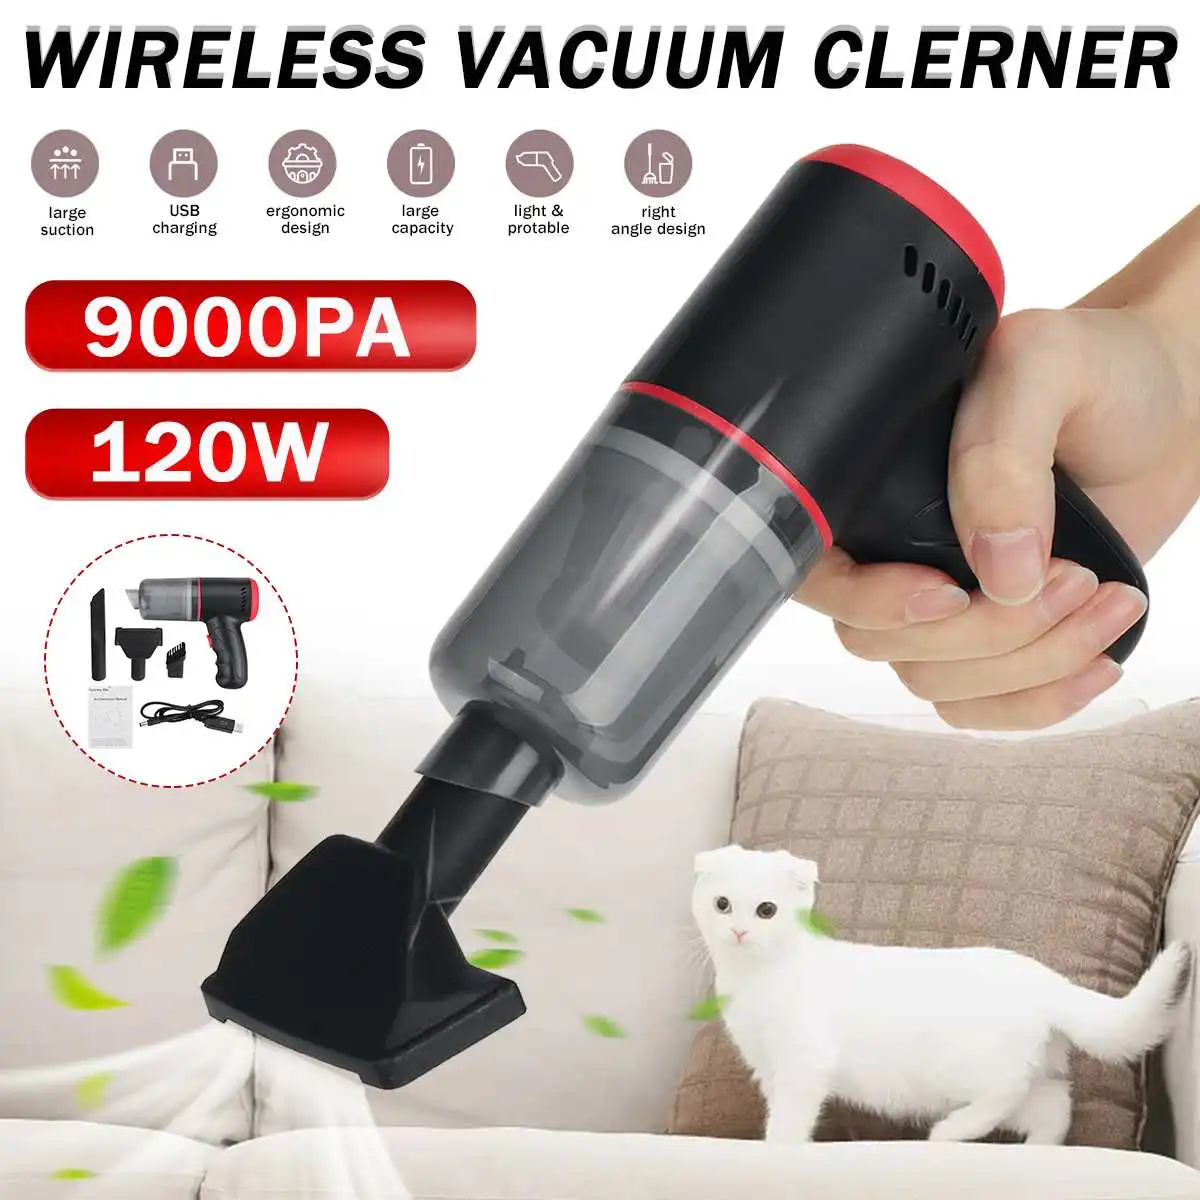 

9000Pa 120W Wireless Car Vacuum Cleaner Home Car Dual-purpose Cordless Handheld Mini Auto Vacuum Cleaner With Built-in Battery